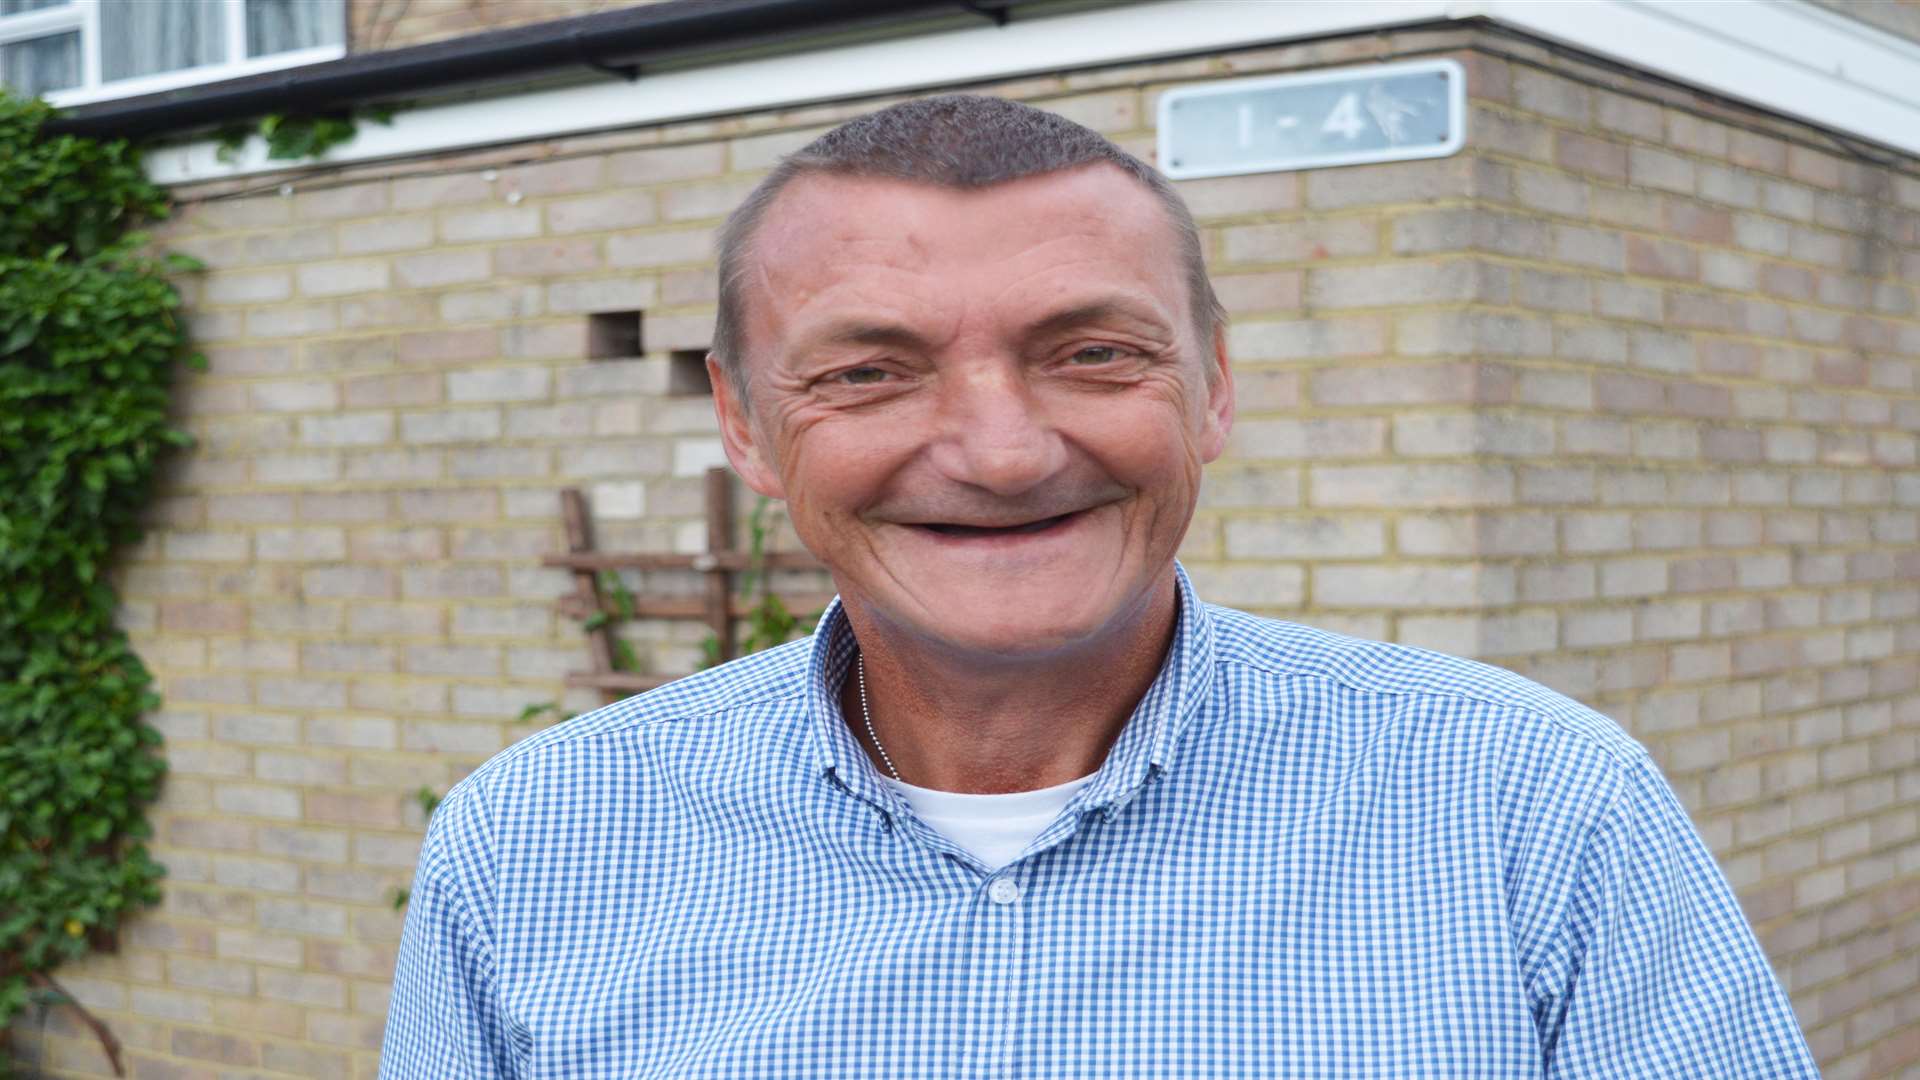 Craig became homeless after the death of his wife but is now looking forward to Christmas in his own home.